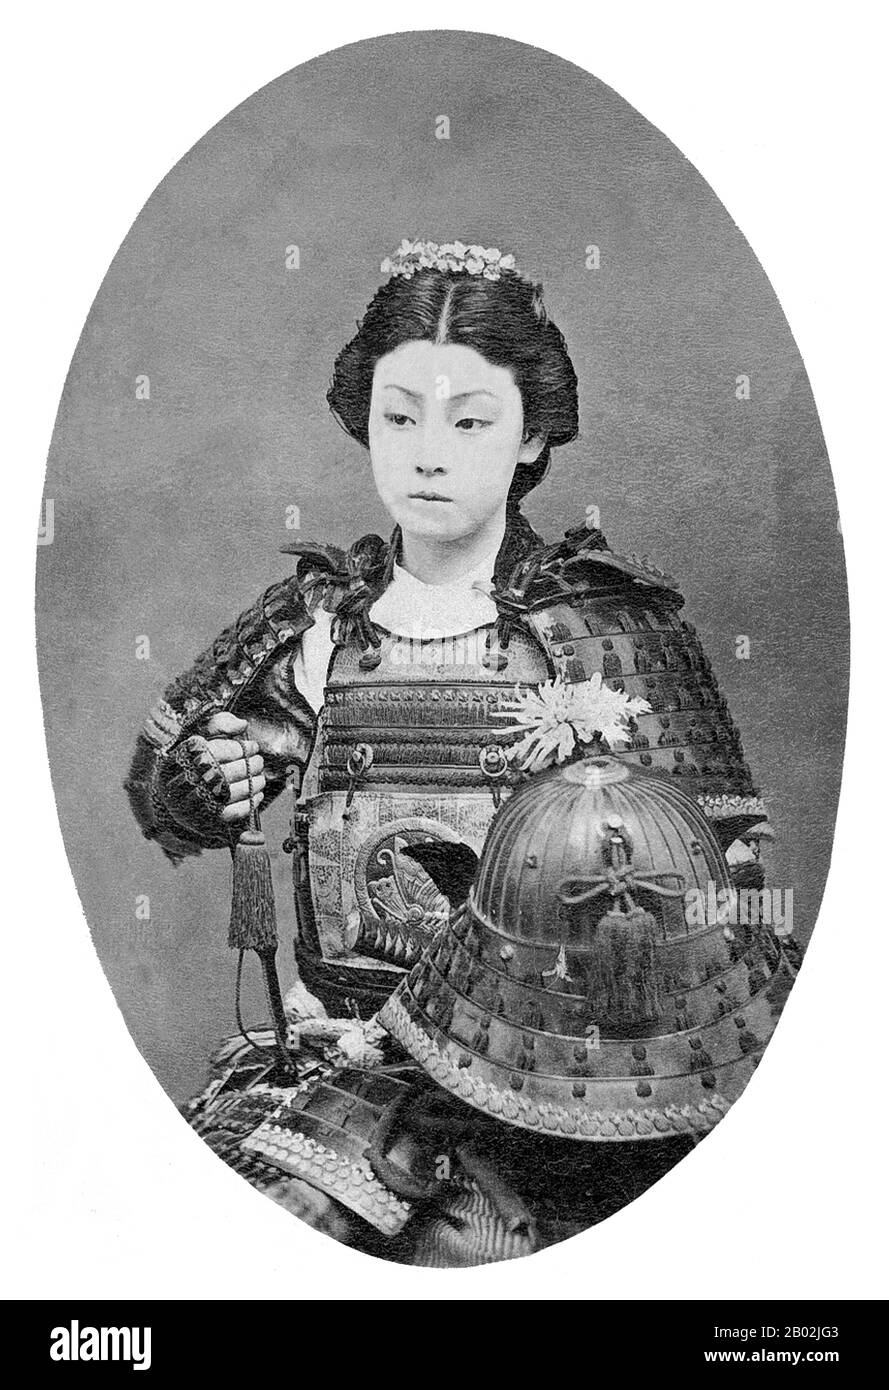 An onna-bugeisha (女武芸者) was a type of female warrior belonging to the Japanese upper class. Many wives, widows, daughters, and rebels answered the call of duty by engaging in battle, commonly alongside samurai men. They were members of the bushi (samurai) class in feudal Japan and were trained in the use of weapons to protect their household, family, and honour in times of war.   They also represented a divergence from the traditional 'housewife' role of the Japanese woman. They are sometimes referred to as female samurai. Significant icons such as Empress Jingu, Tomoe Gozen, Nakano Takeko, an Stock Photo